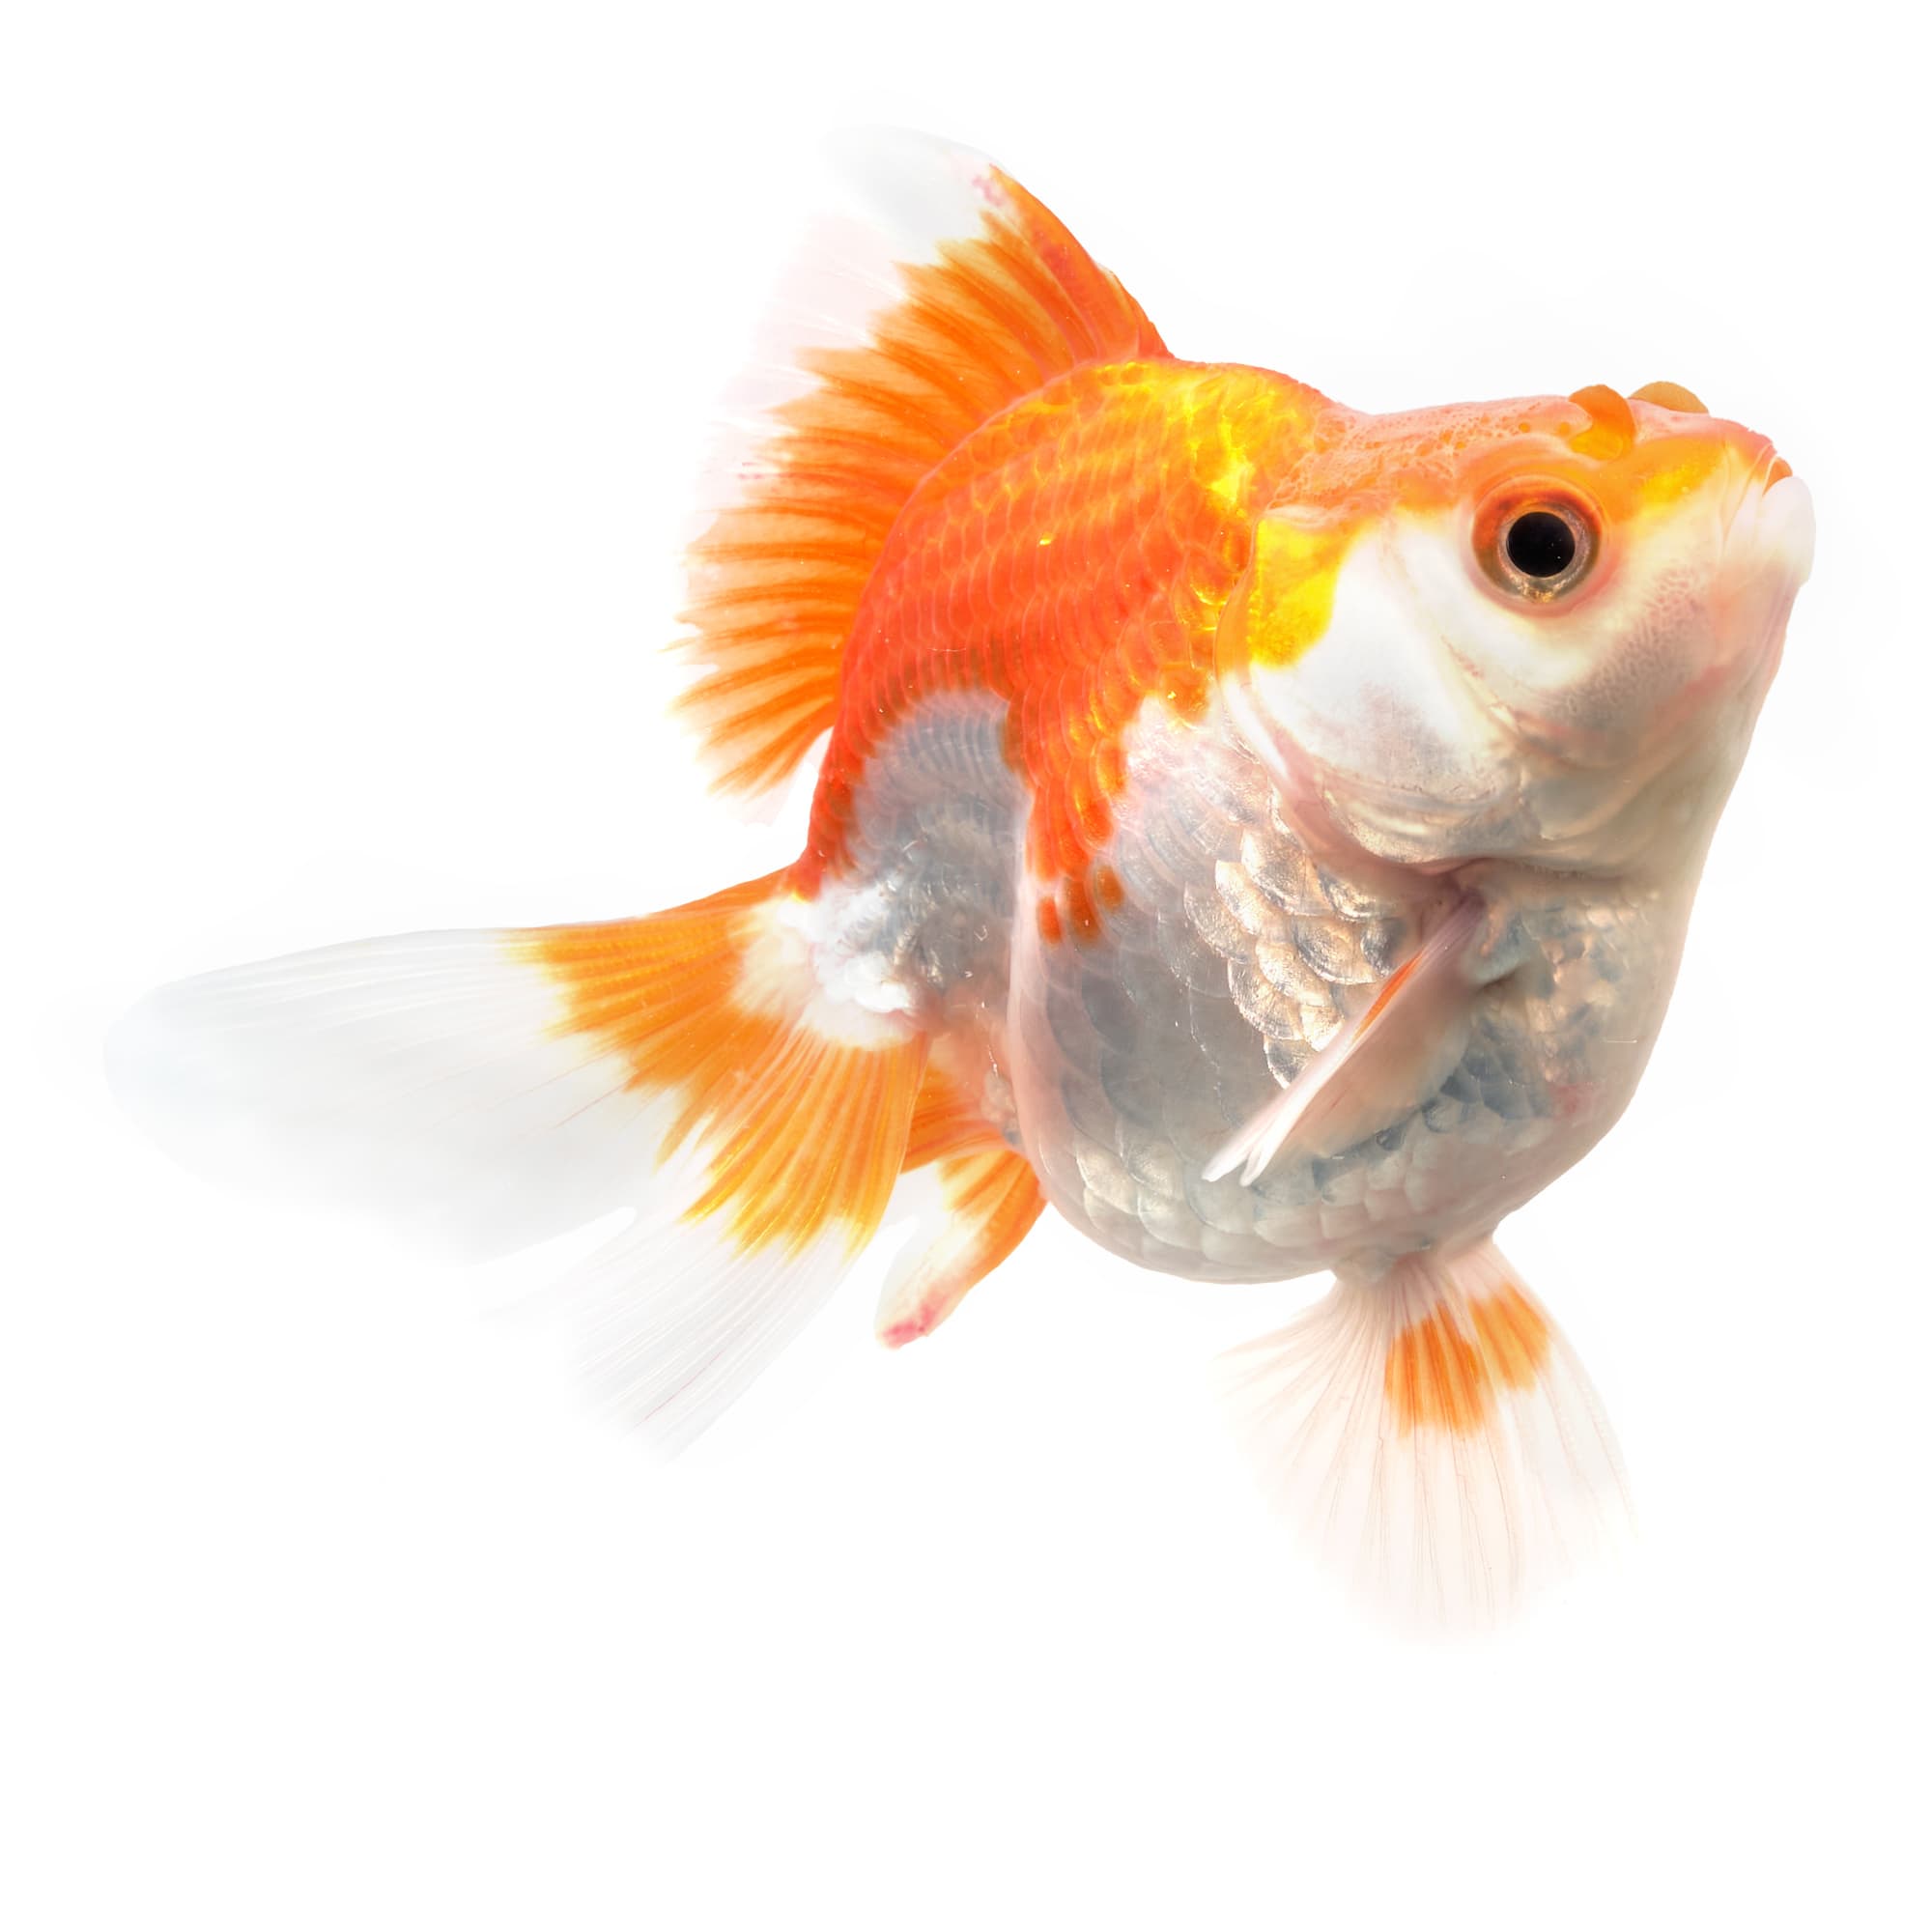 How to Take Care of Your Fancy Goldfish